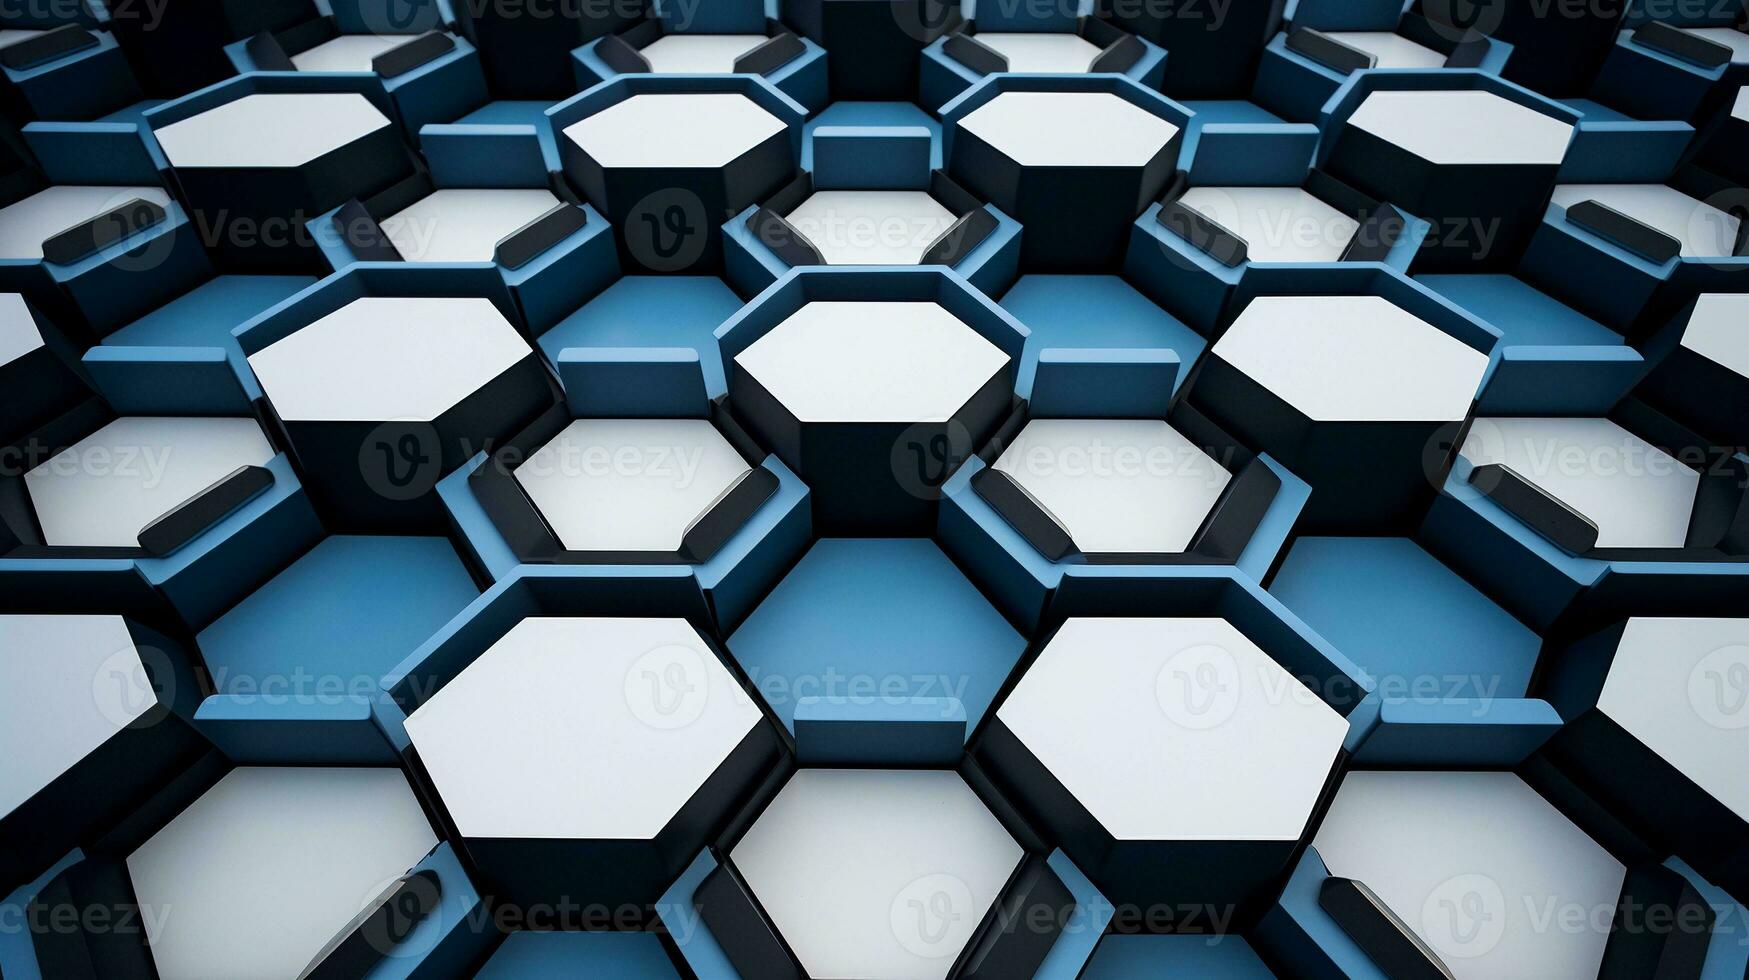 A visually appealing composition highlighting the precision of hexagonal patterns in architecture or design, with designated areas for text, background image, AI generated photo